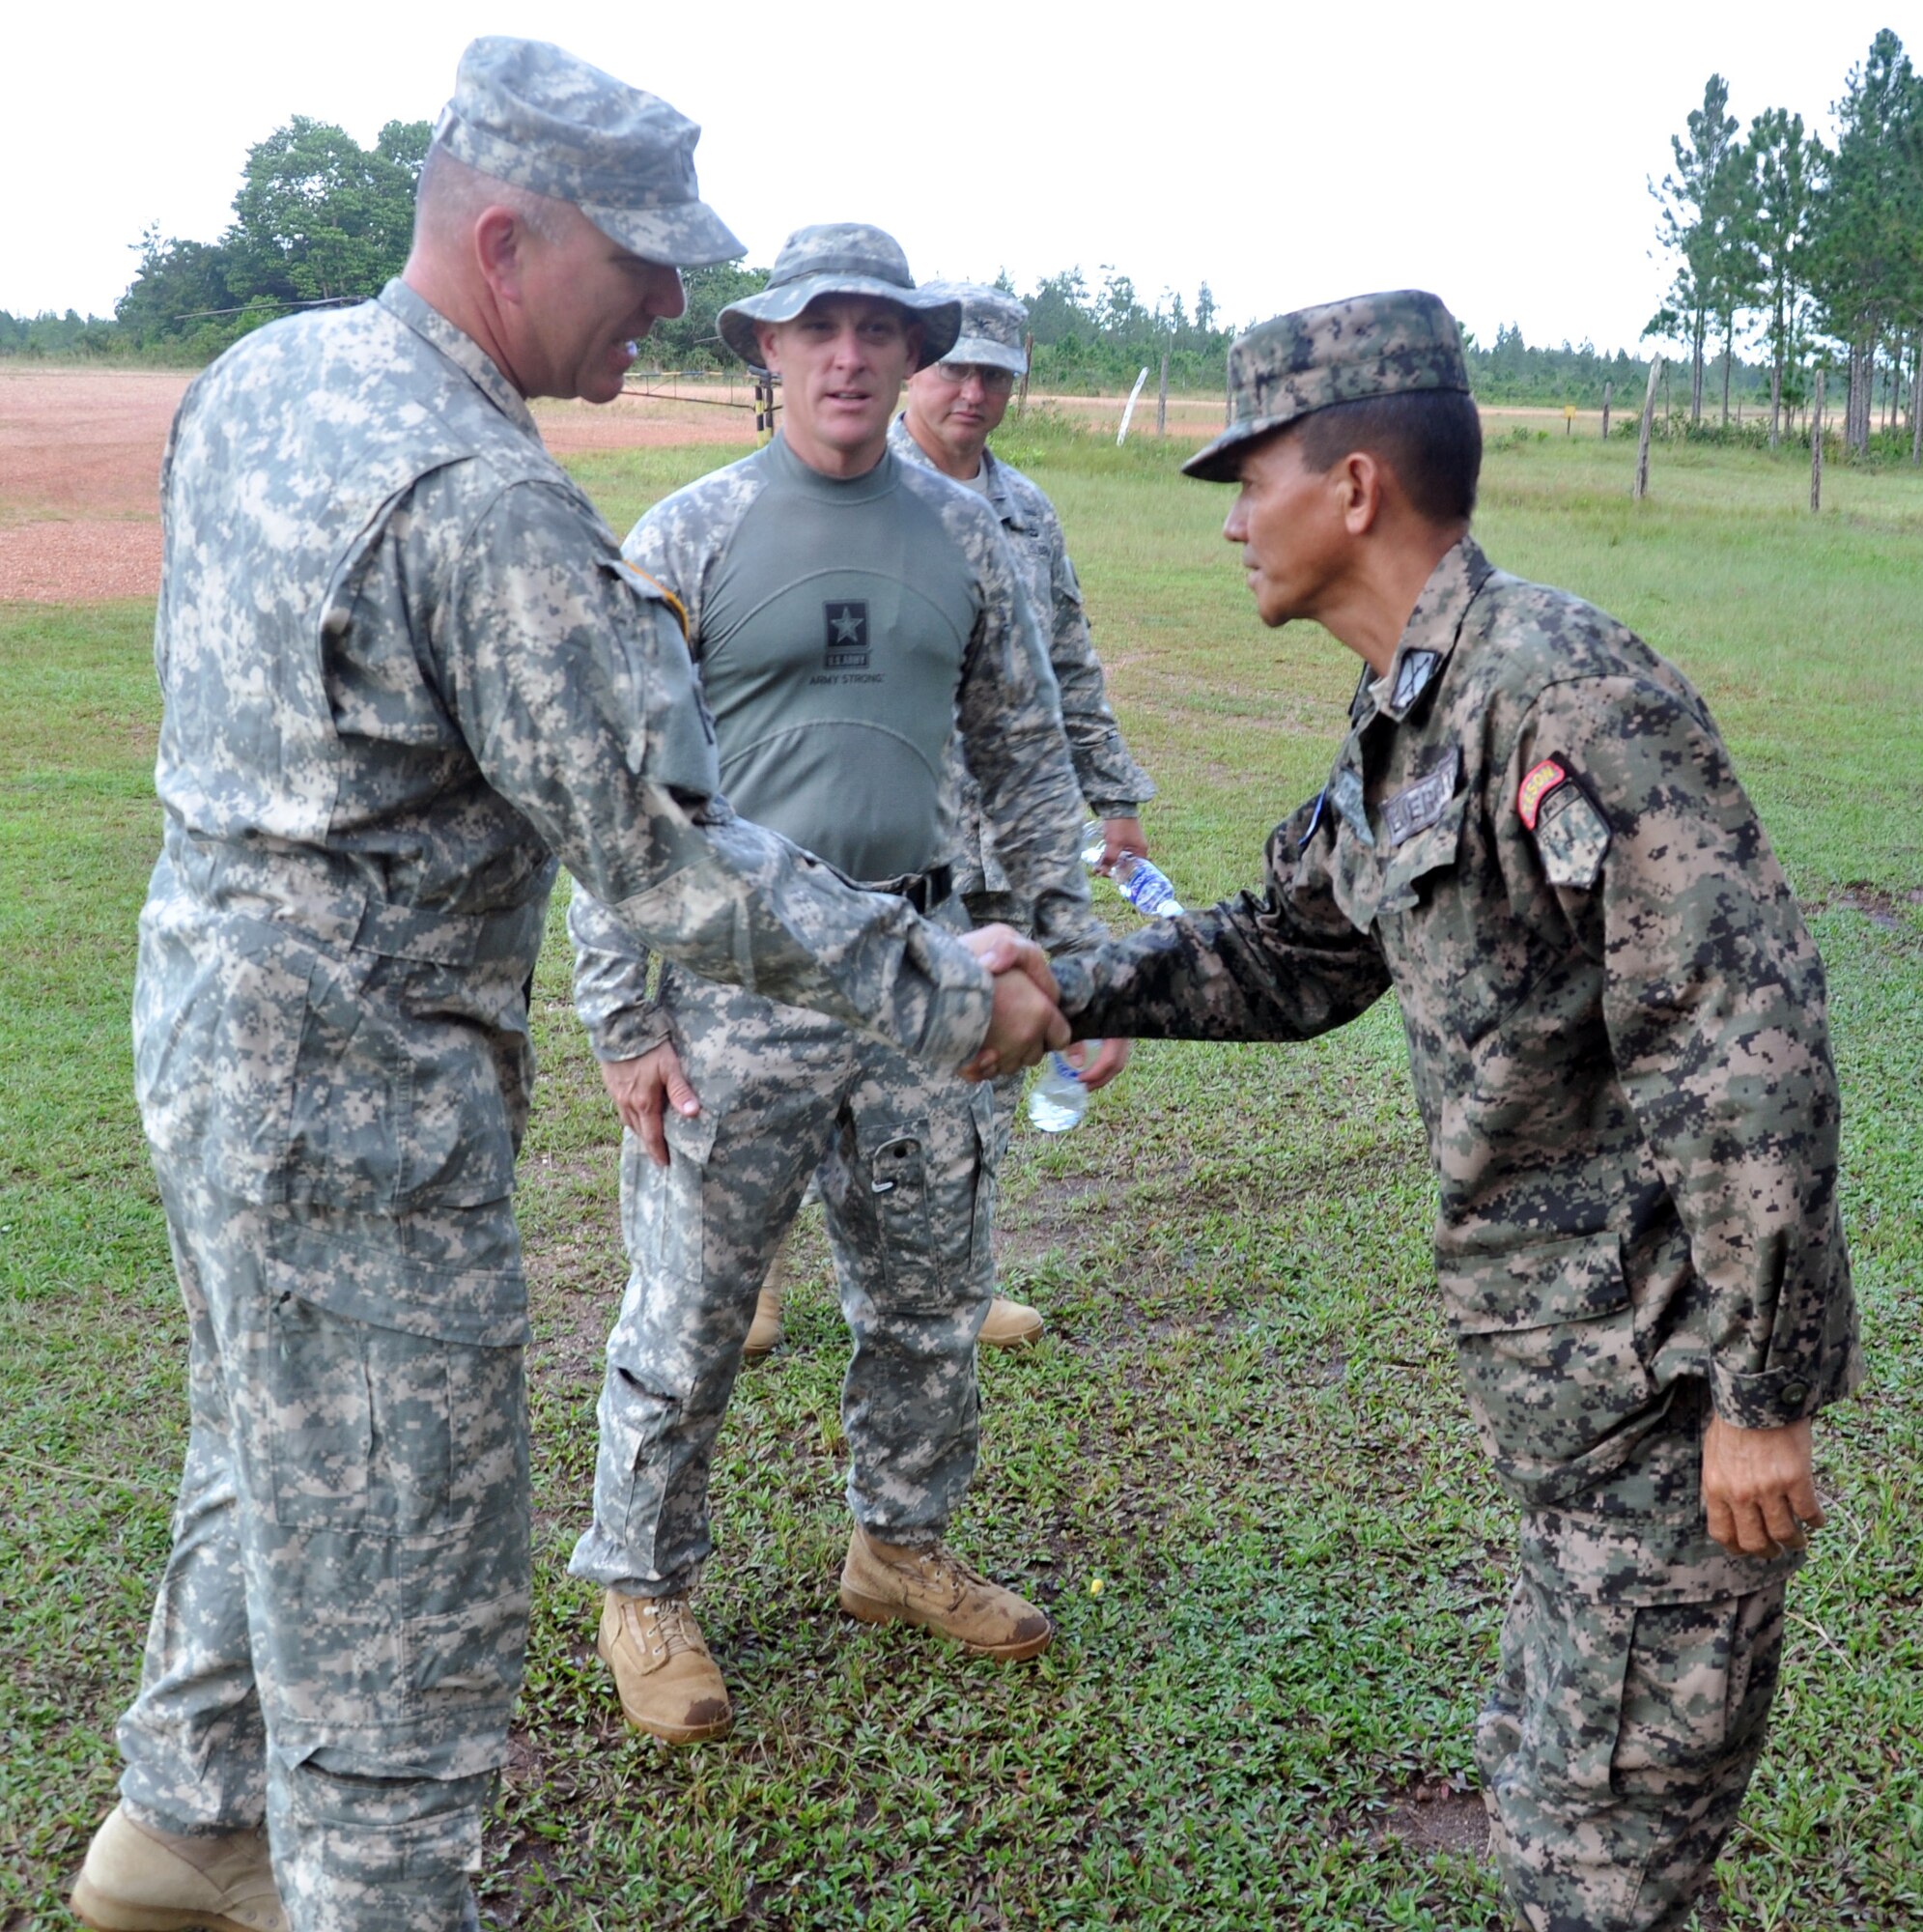 U.S. Army Col. Thomas Boccardi, Joint Task Force-Bravo Commander, is welcomed to Mocoron by Honduran Army Lt. Col. Santos Colindres, Deputy Commander of the Honduran 5th Infantry Batallion, at Mocoron, Honduras, Nov. 20, 2013. Boccardi and Colindres discussed how Joint Task Force-Bravo can continue to assist and work together with the Honduran military, as well as the importance of continuing to build on the strong relationship between the United States and Honduras. (U.S. Air Force photo by Capt. Zach Anderson)